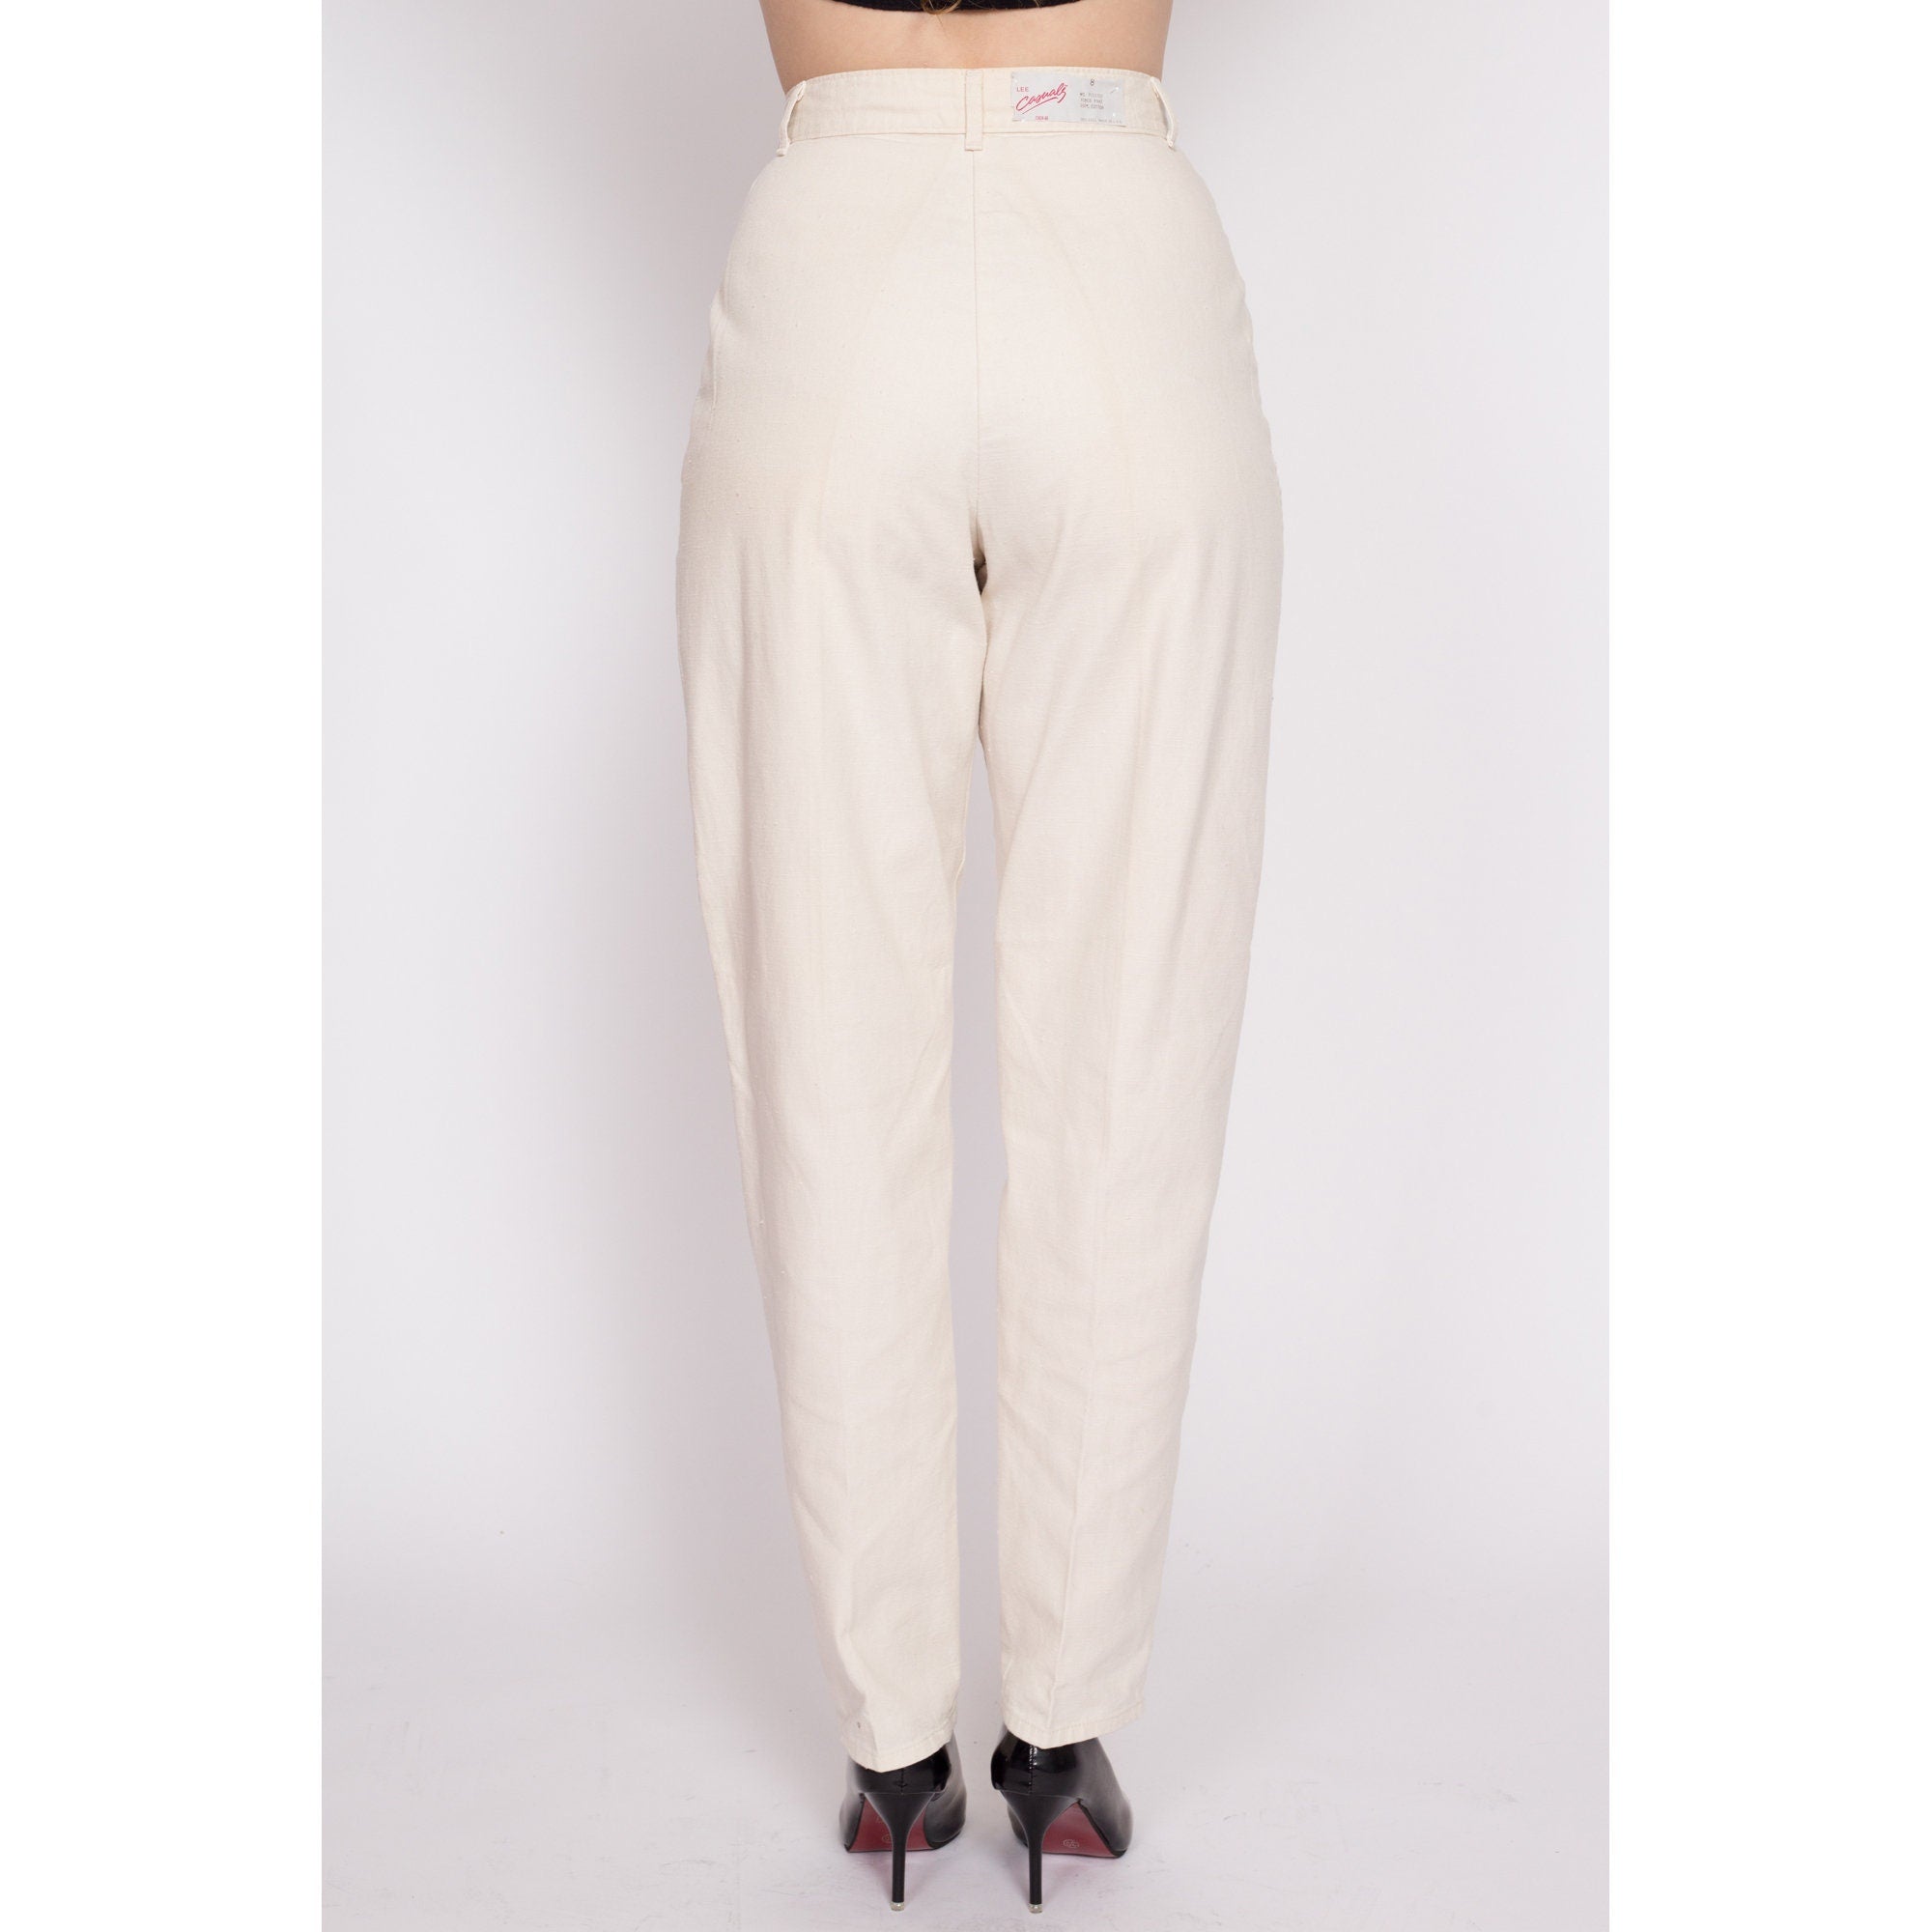 Vintage 80s 90s Tan Lightweight Rayon Pleated Trouser Pants